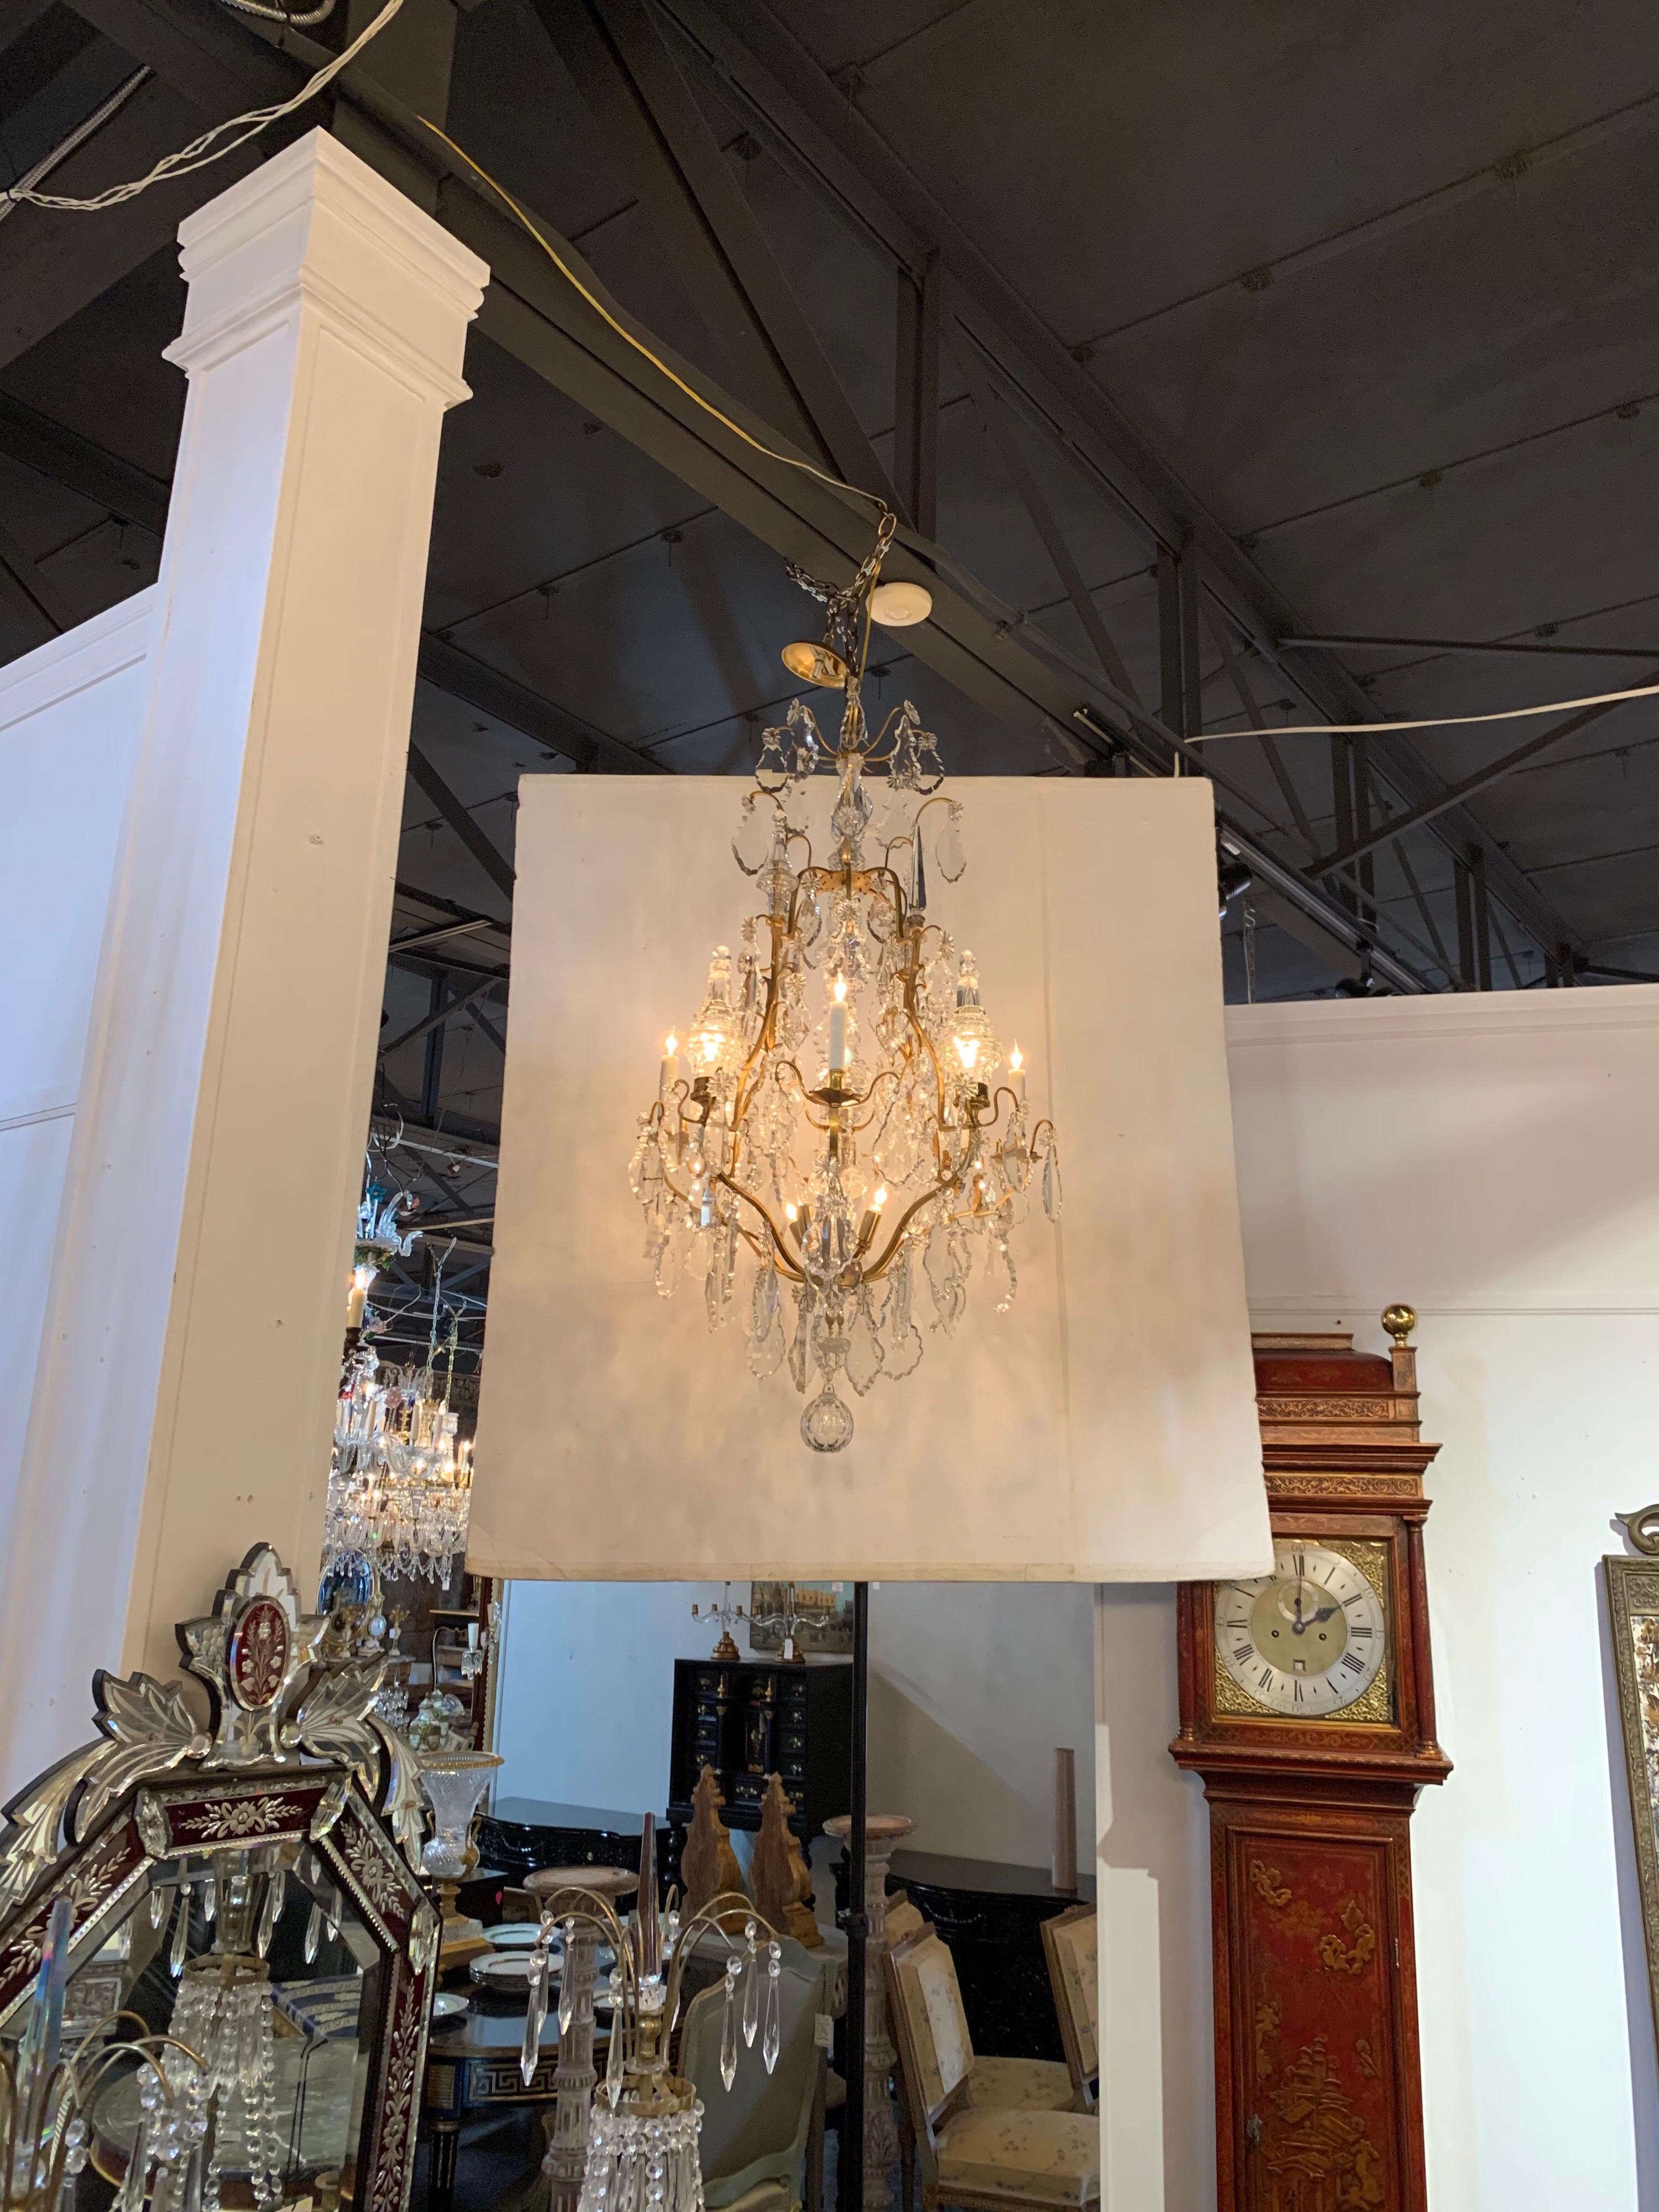 Lovely French gilt and bronze crystal chandelier. The fixture has 11 lights and a multitude of large dangling crystals. Very elegant!